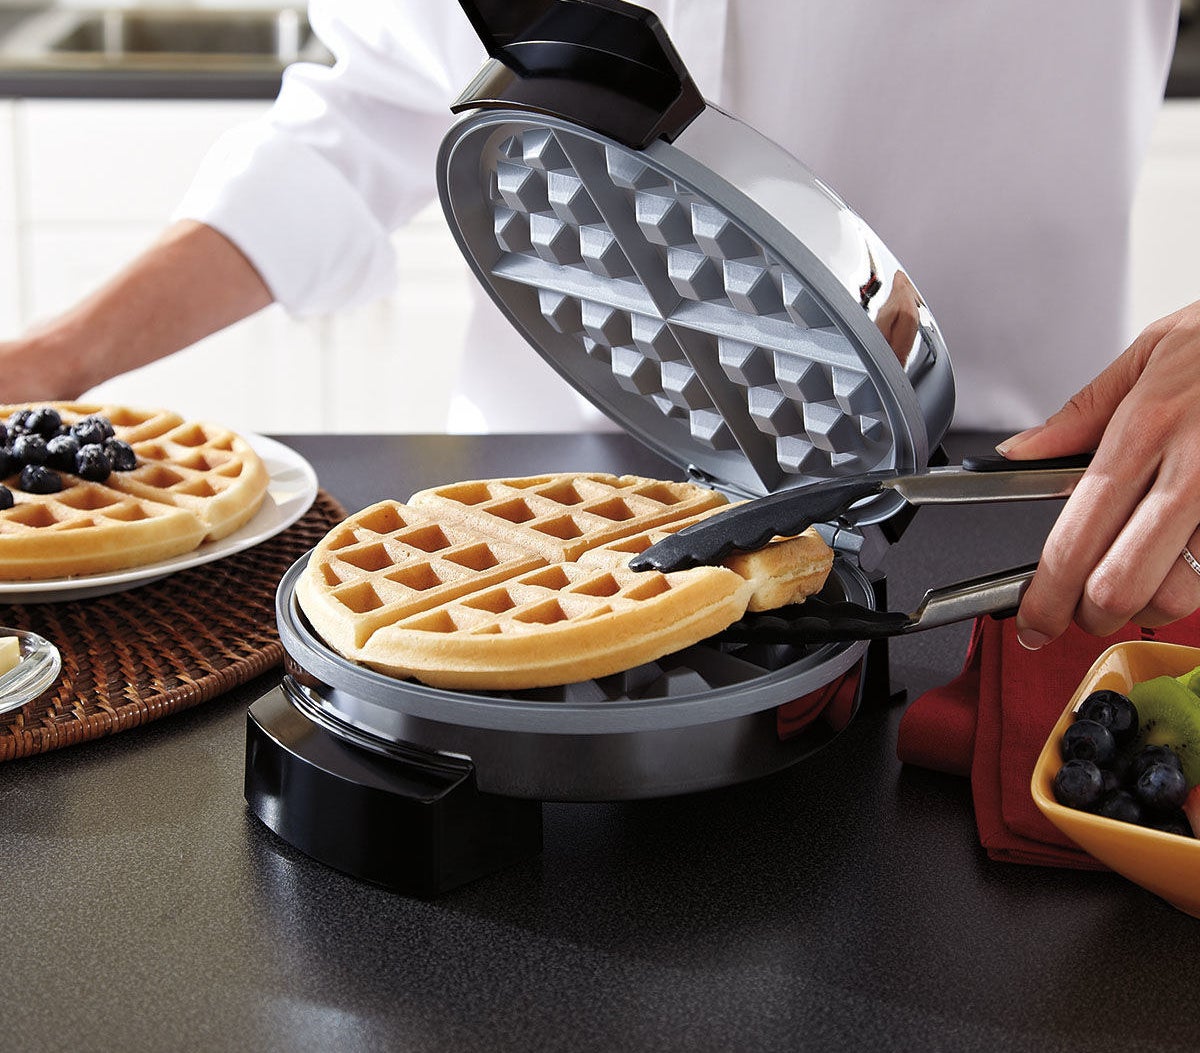 a freshly made waffle being removed from the waffle maker